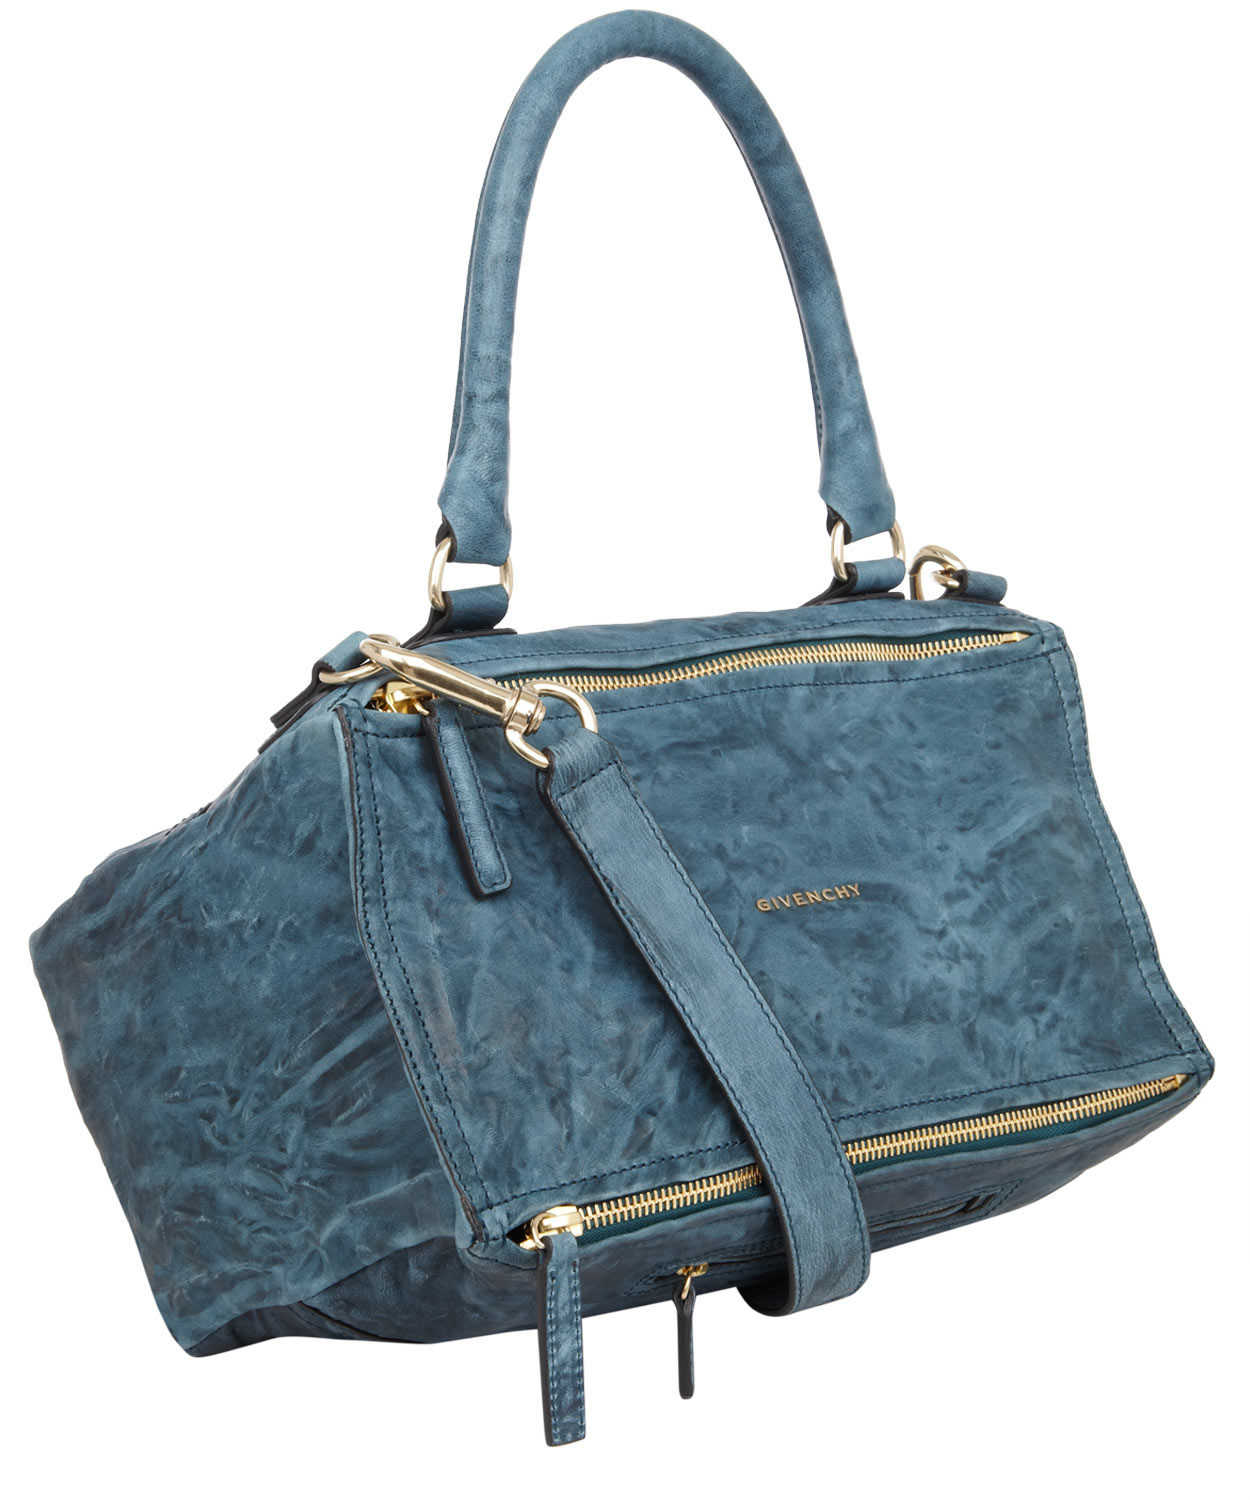 Givenchy Peacock Medium Washed Pandora Satchel in Blue - Lyst